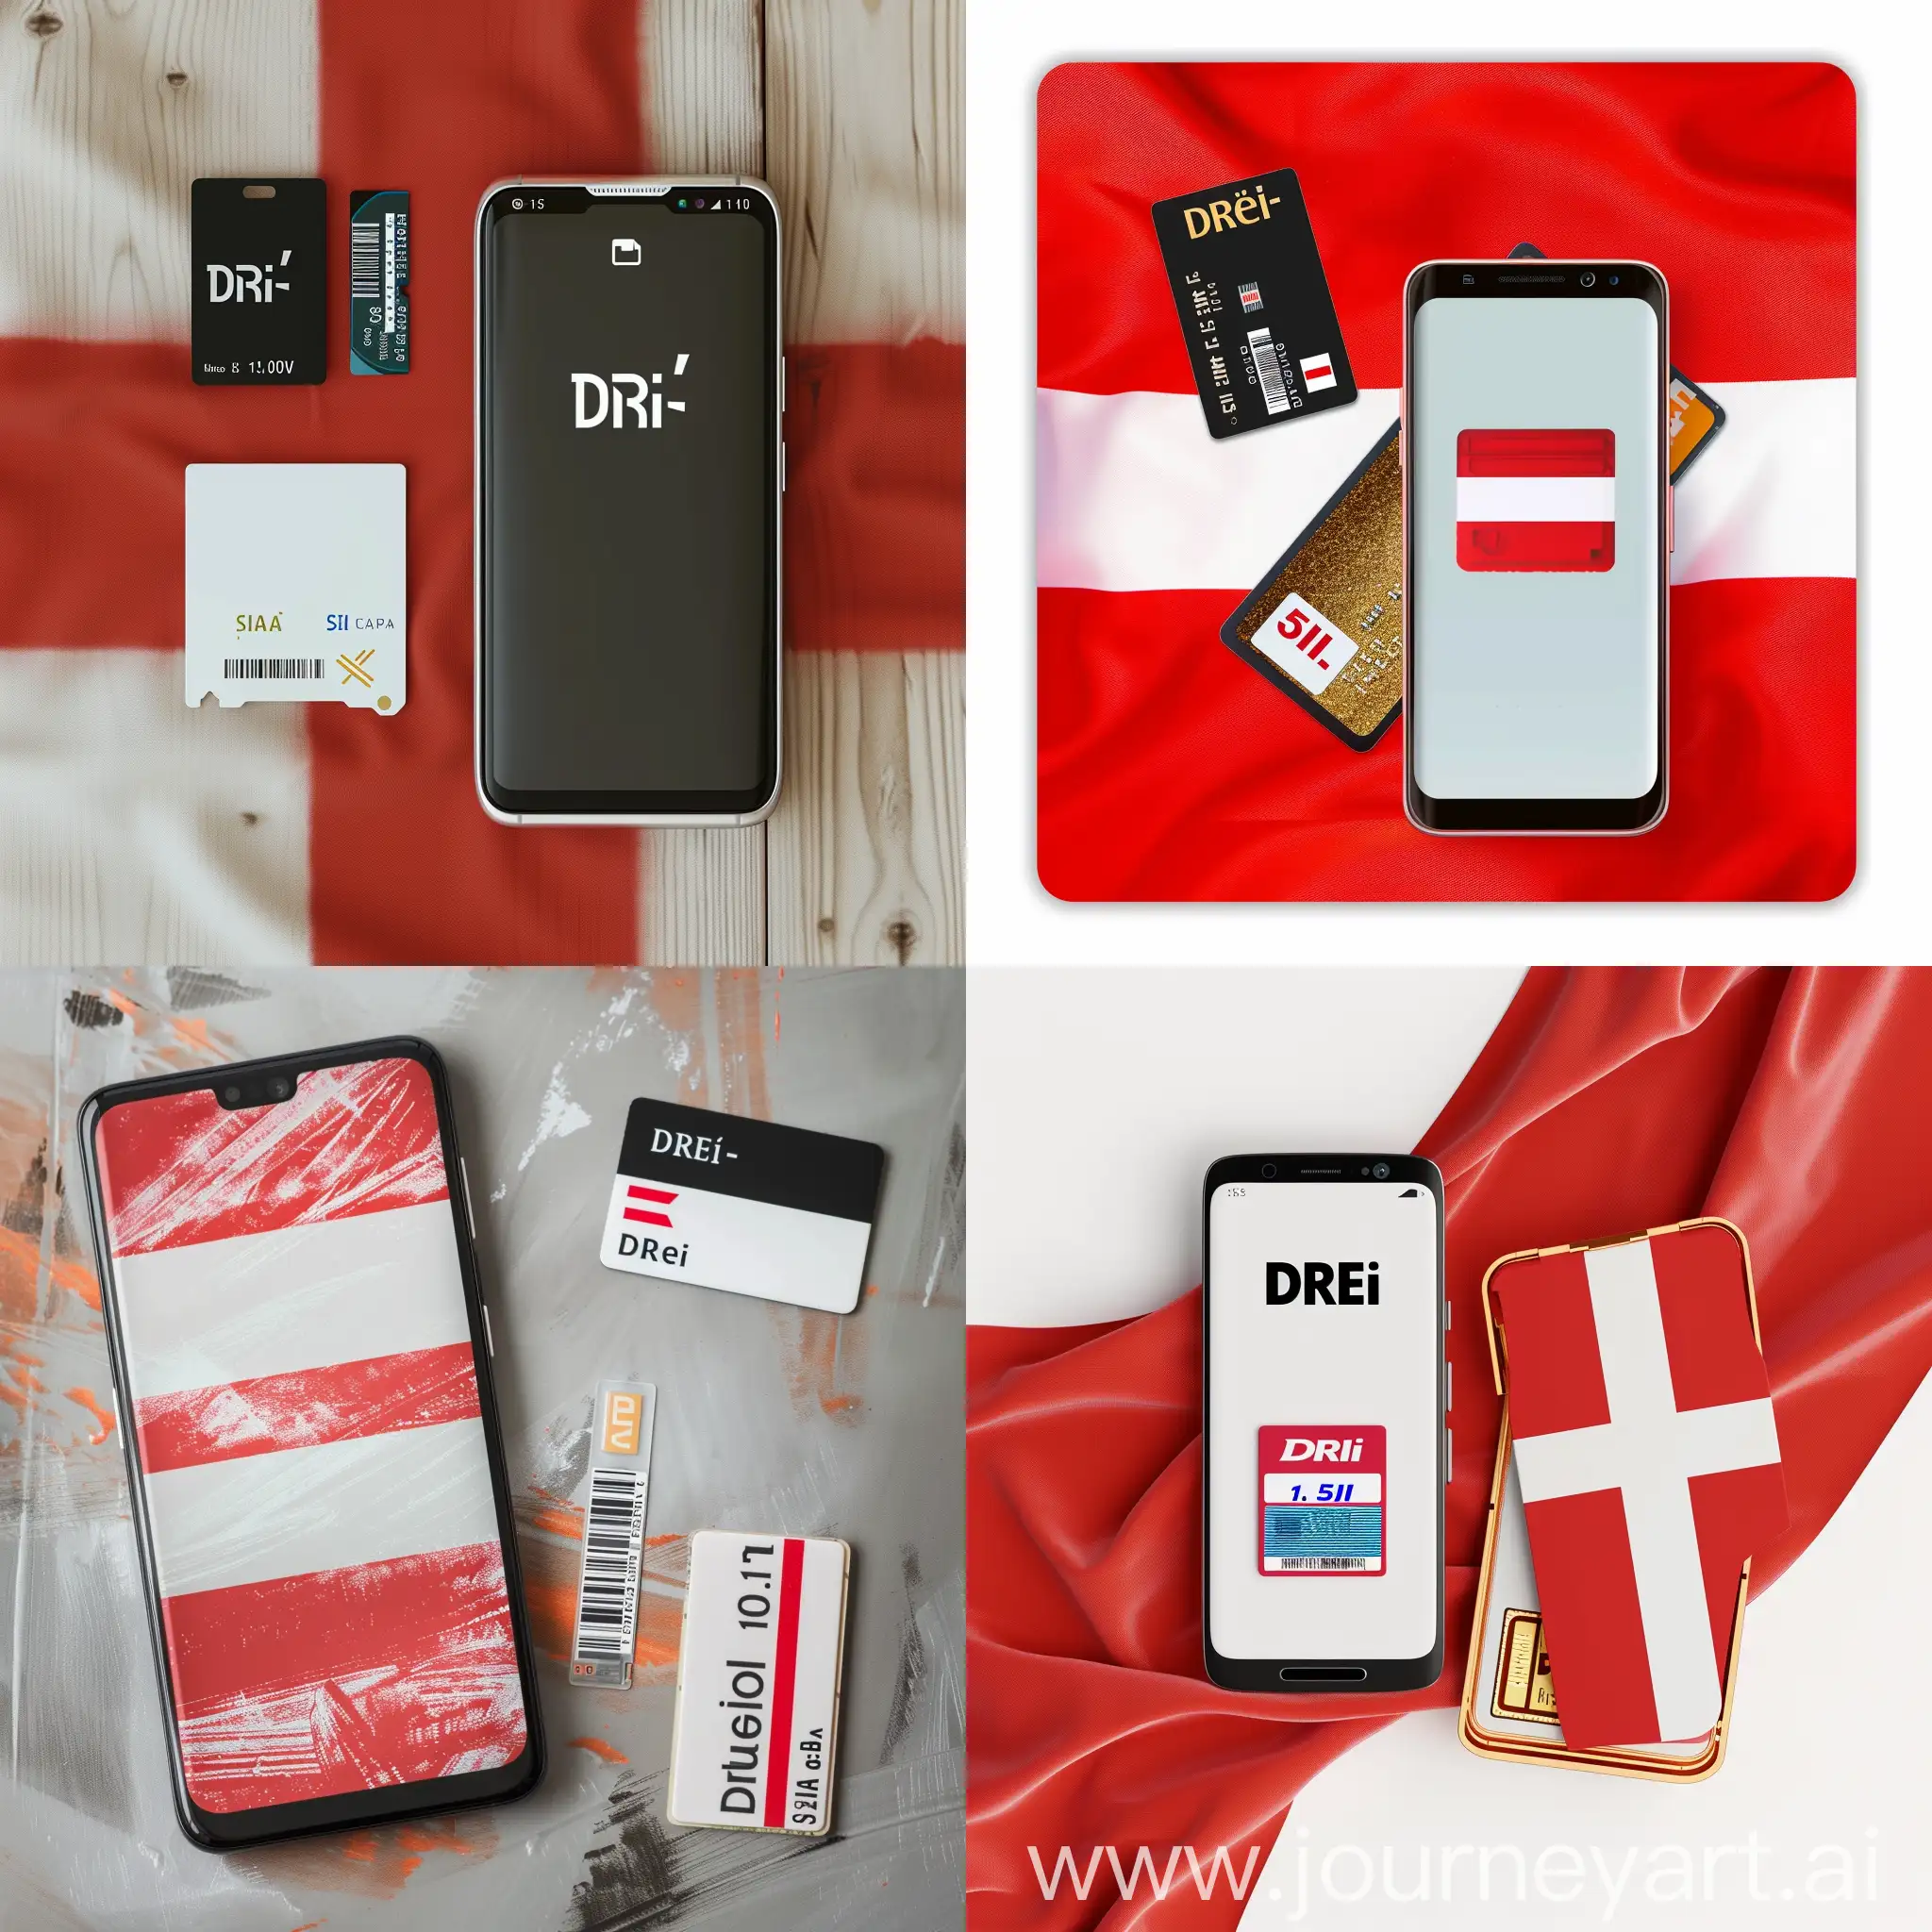 Austrian-Flagthemed-Smartphone-with-Drei-and-05-USD-Text